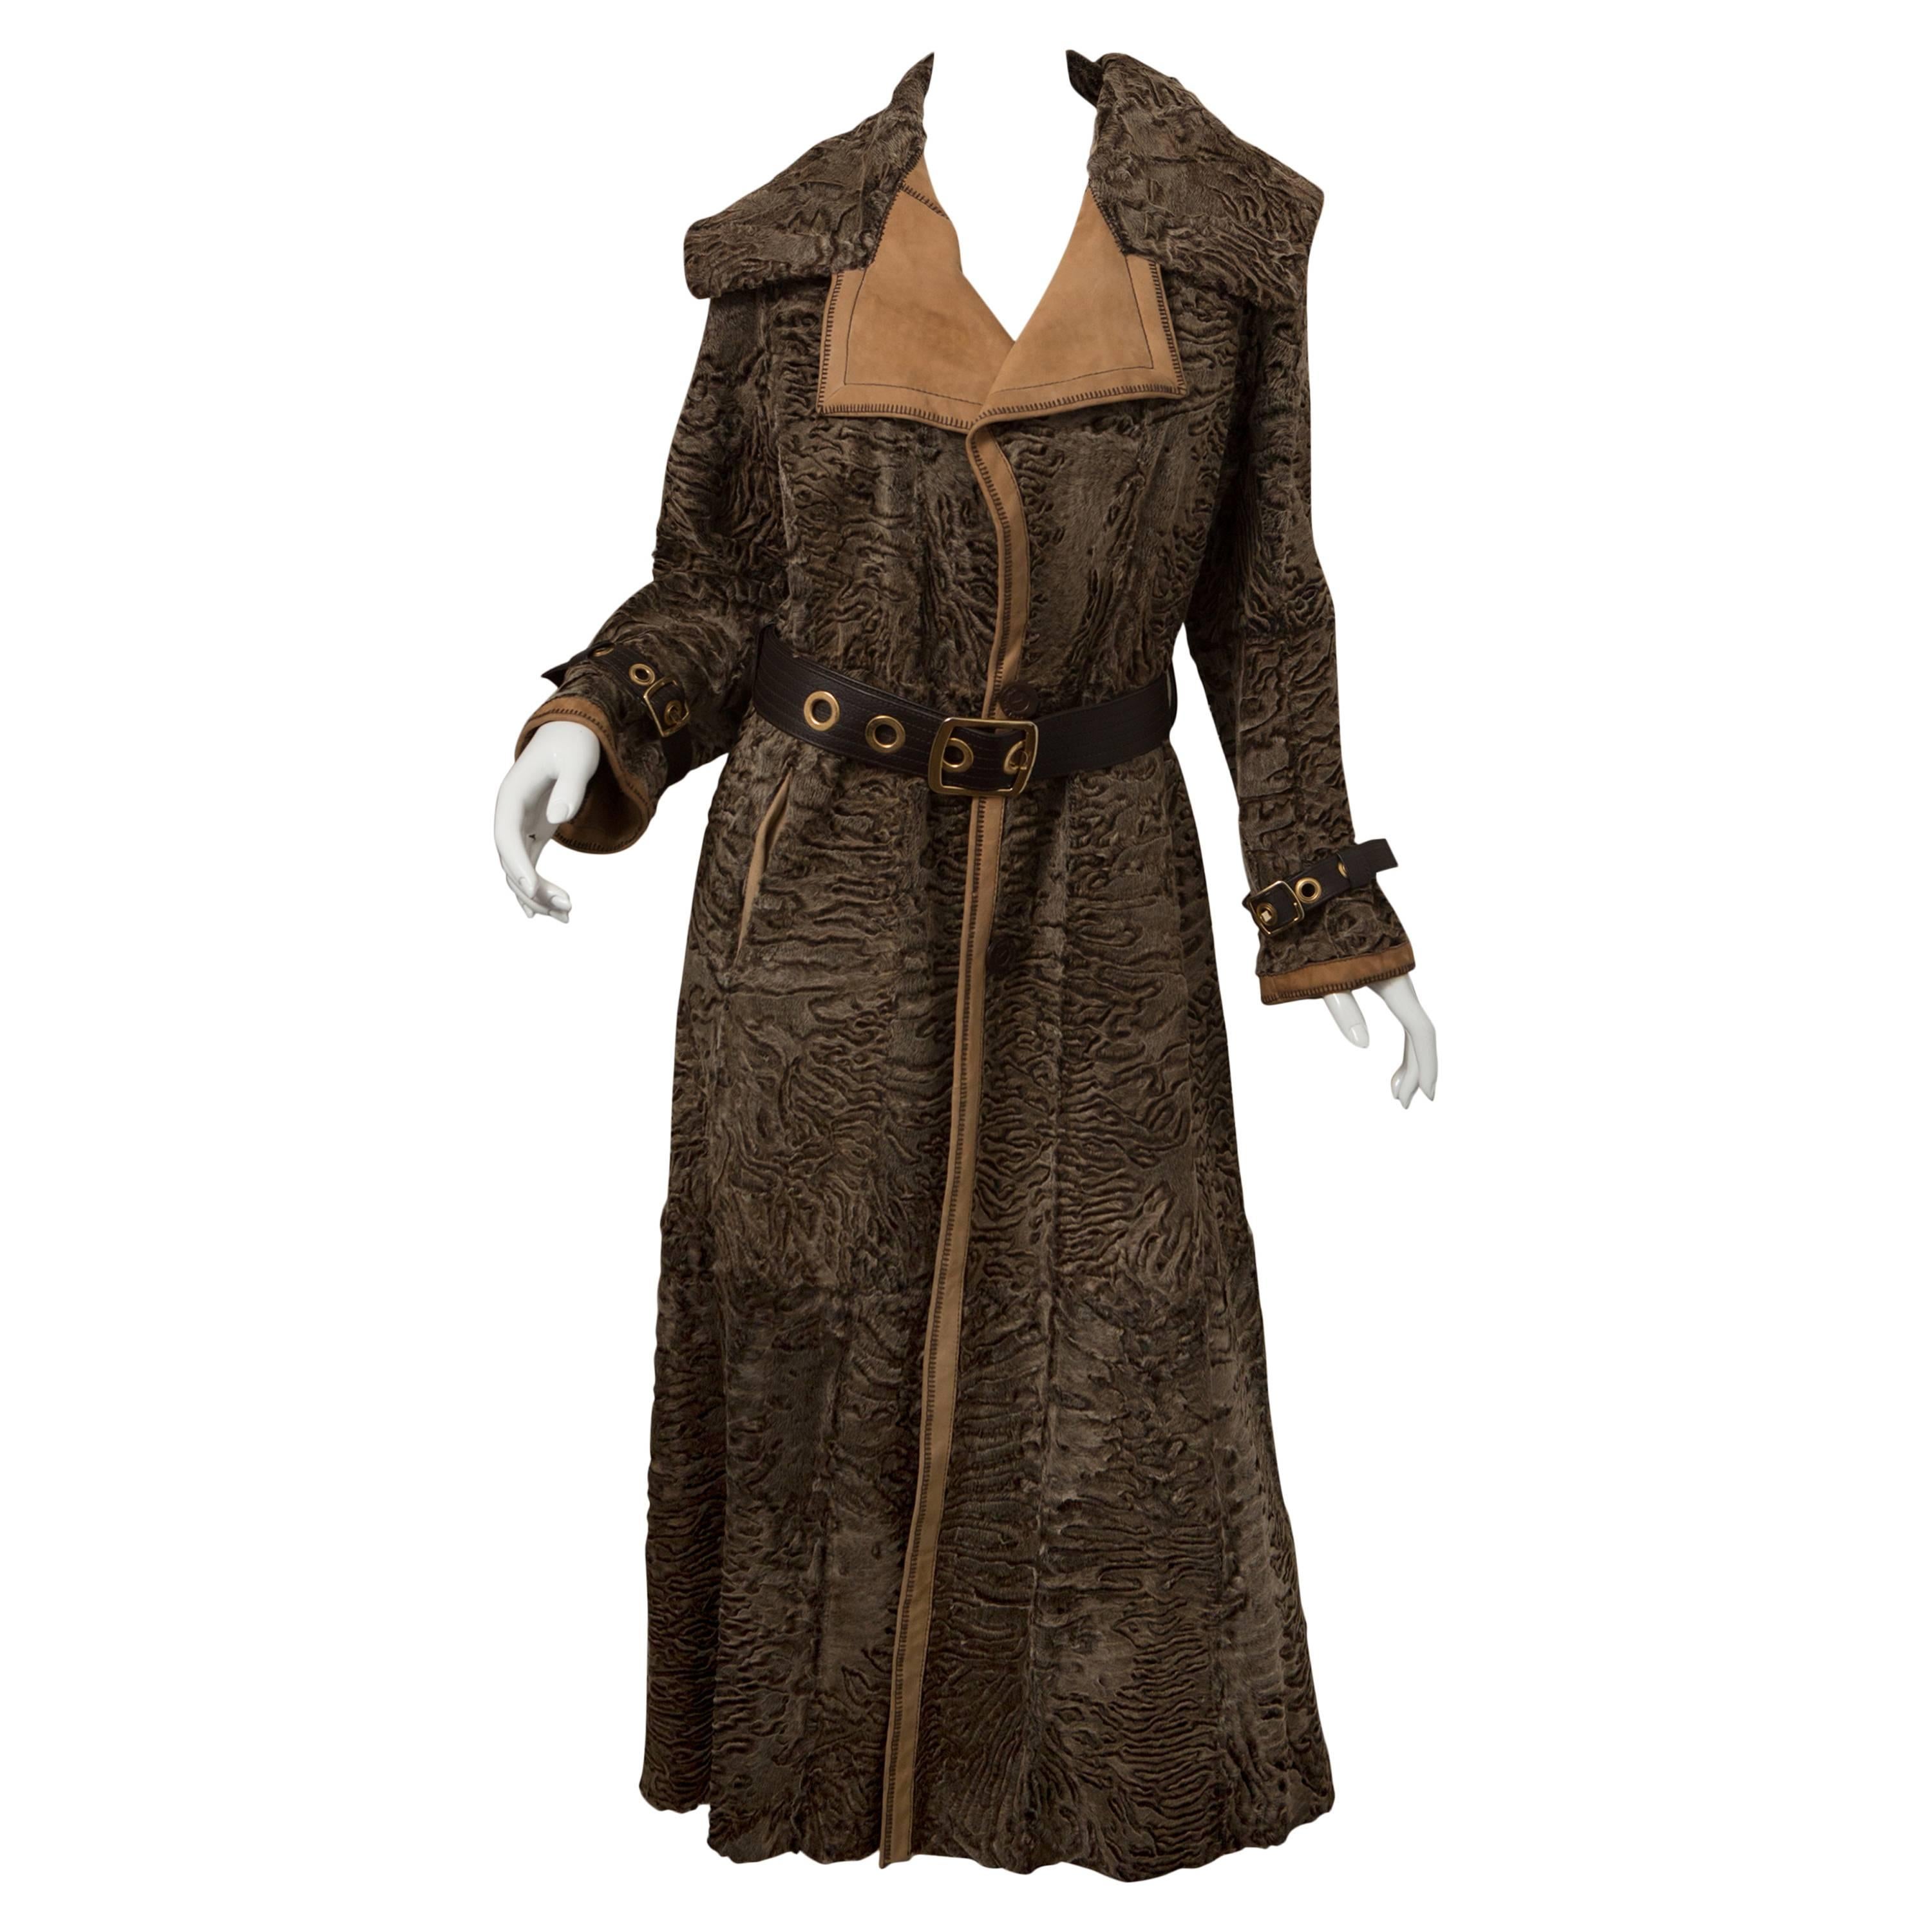 Giuliana Teso Broadtail Coat With Belt And Gold Hardware